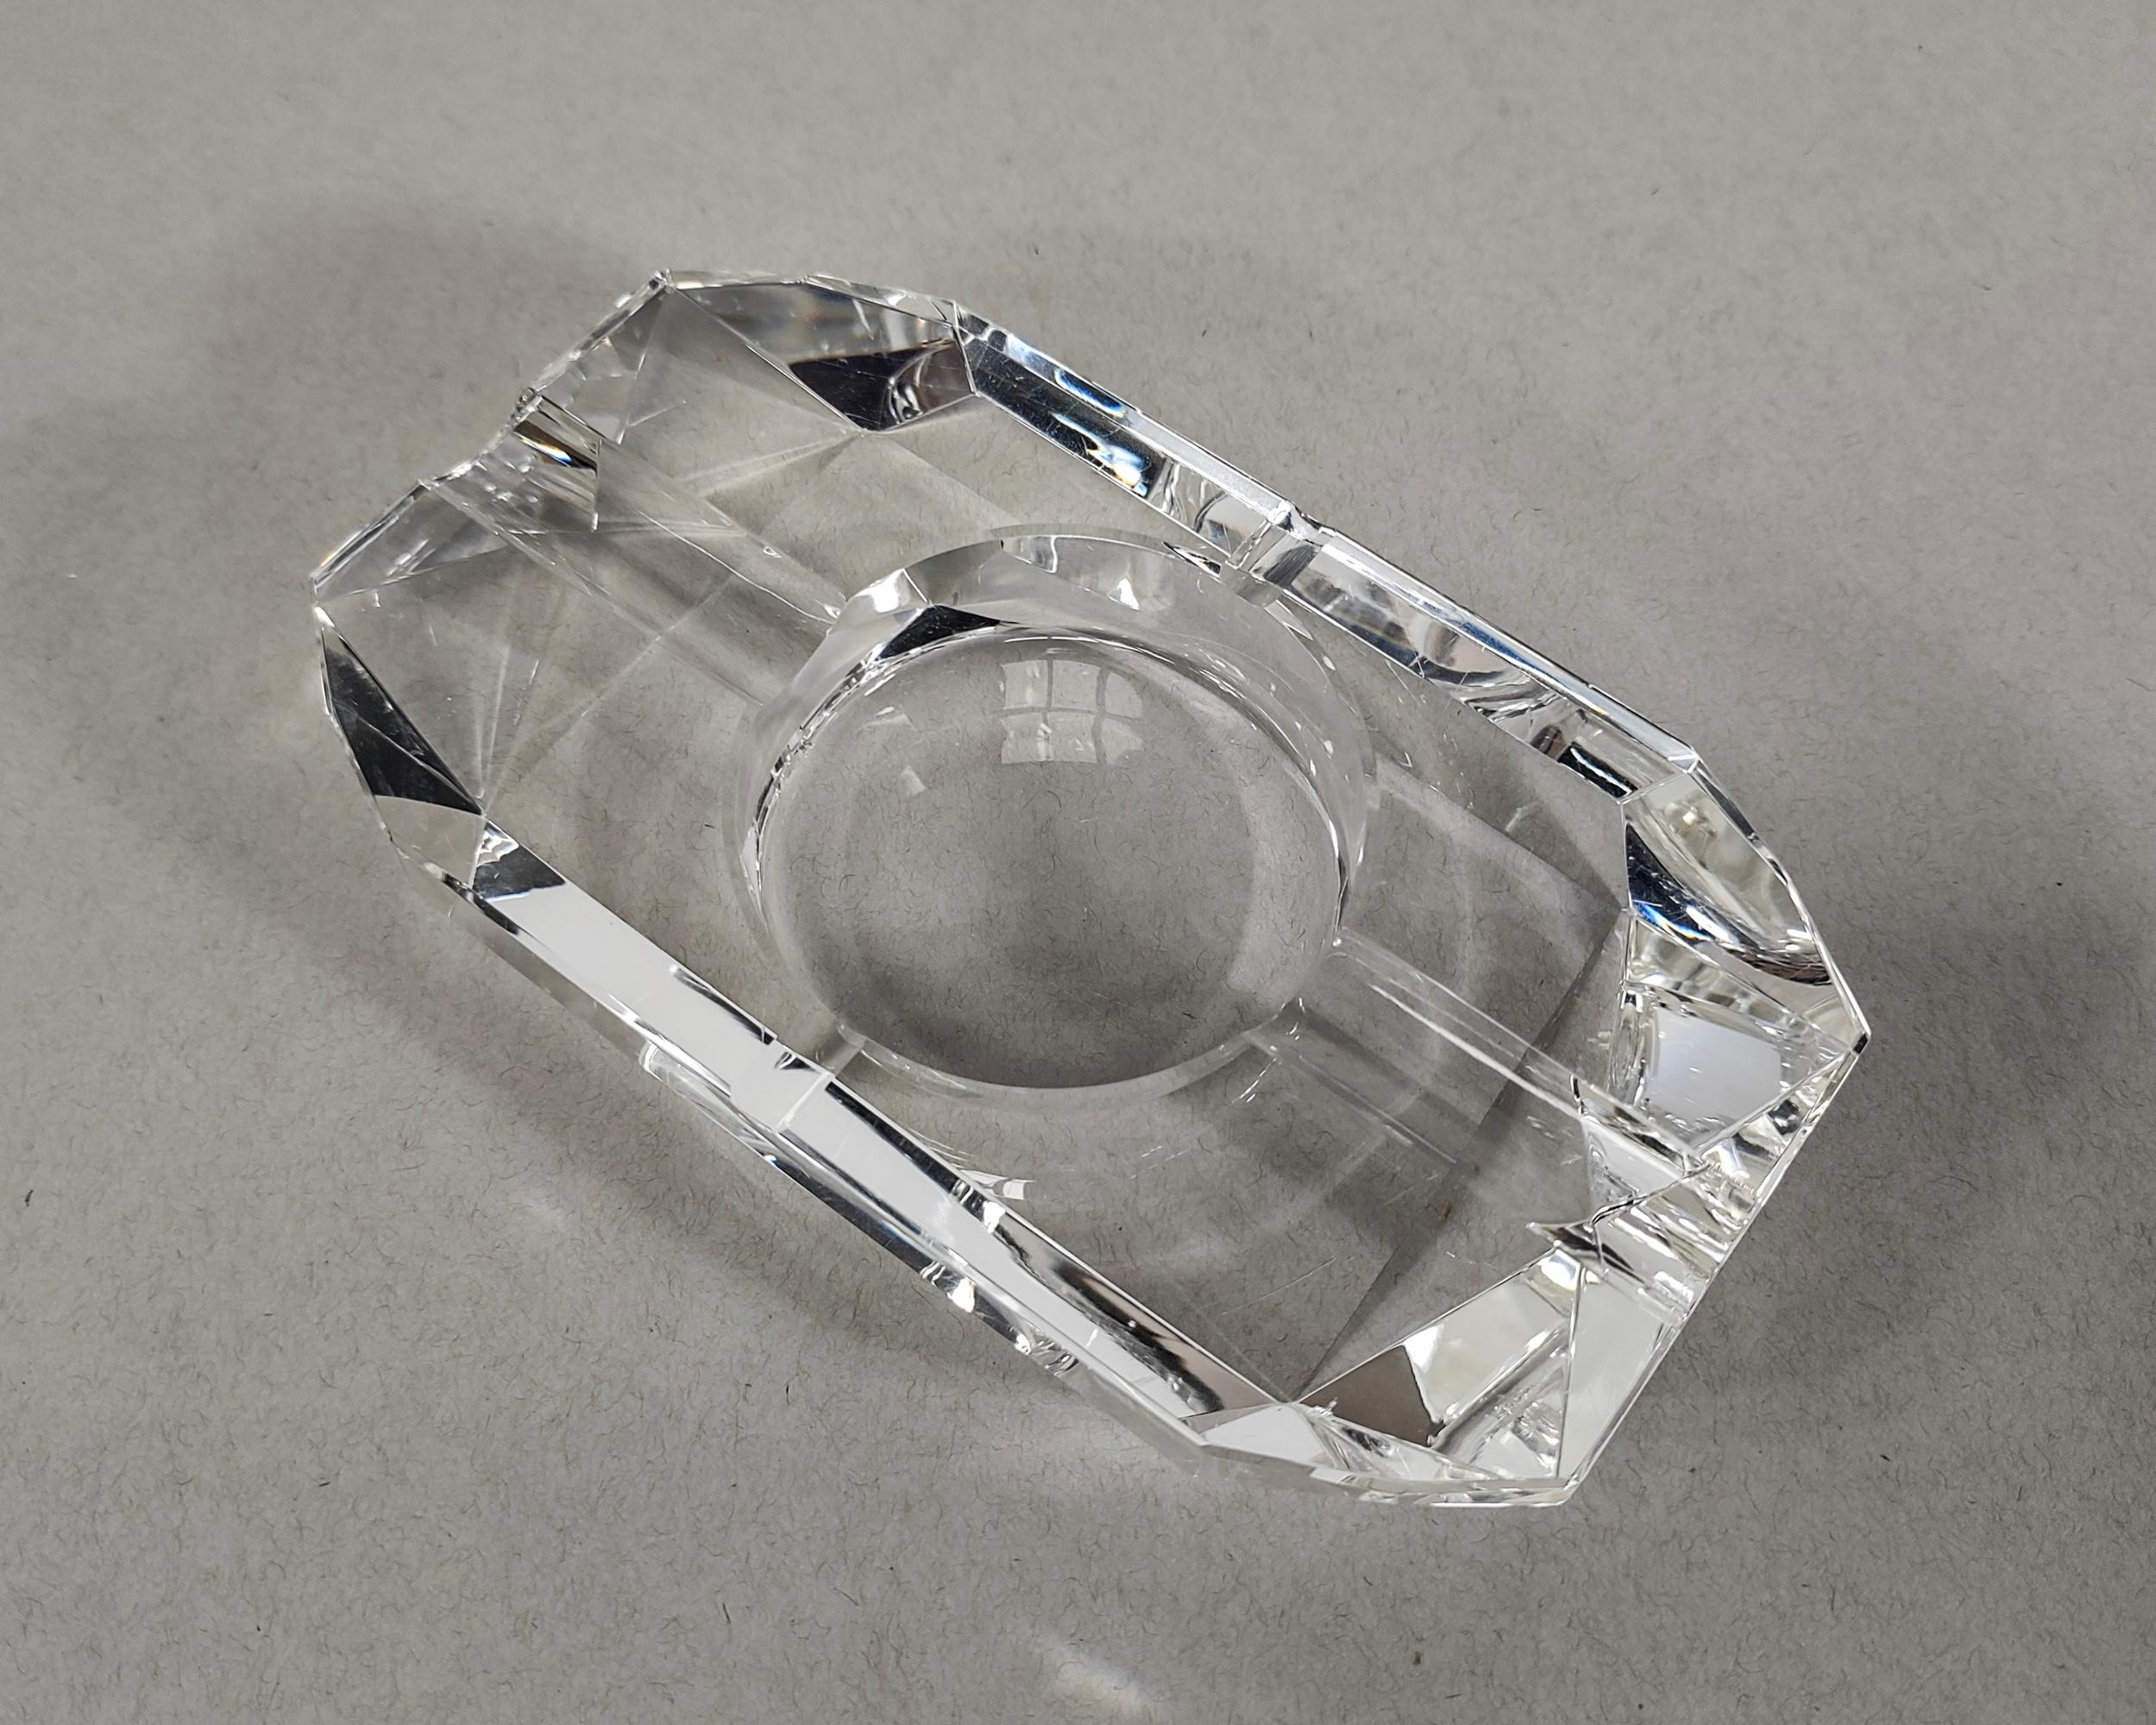 Vintage low thick clear glass ashtray. Beautiful facets that make this piece shine in different lightings. Divots for cigarettes on each side. No chips but some scratches are present.

4